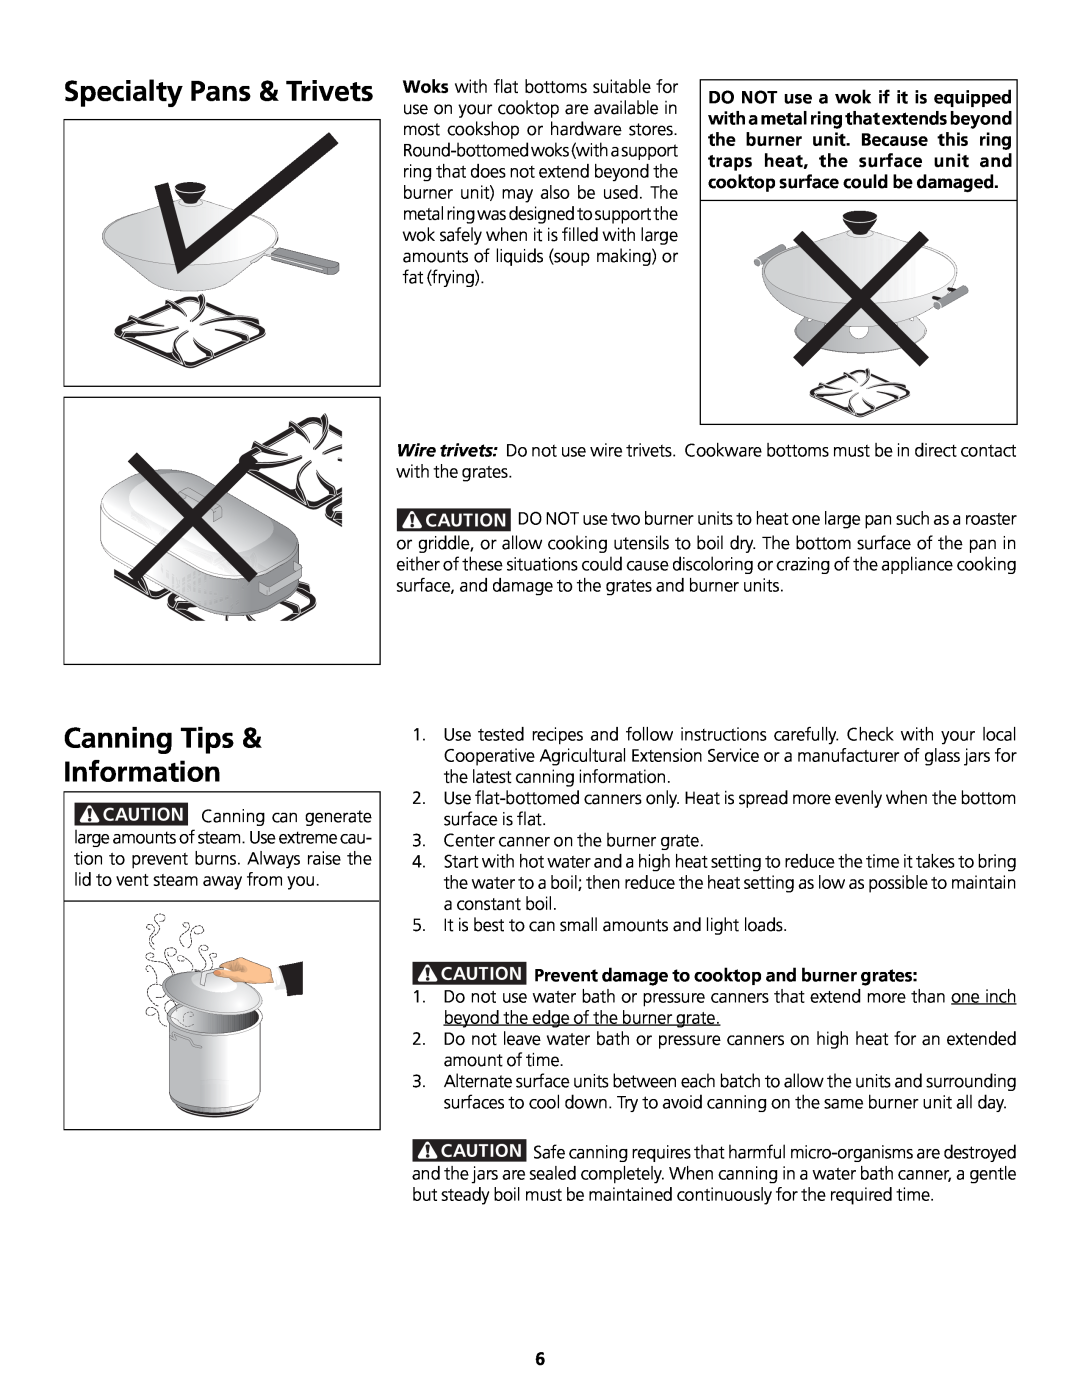 Frigidaire 318200858 important safety instructions Canning Tips Information, Prevent damage to cooktop and burner grates 